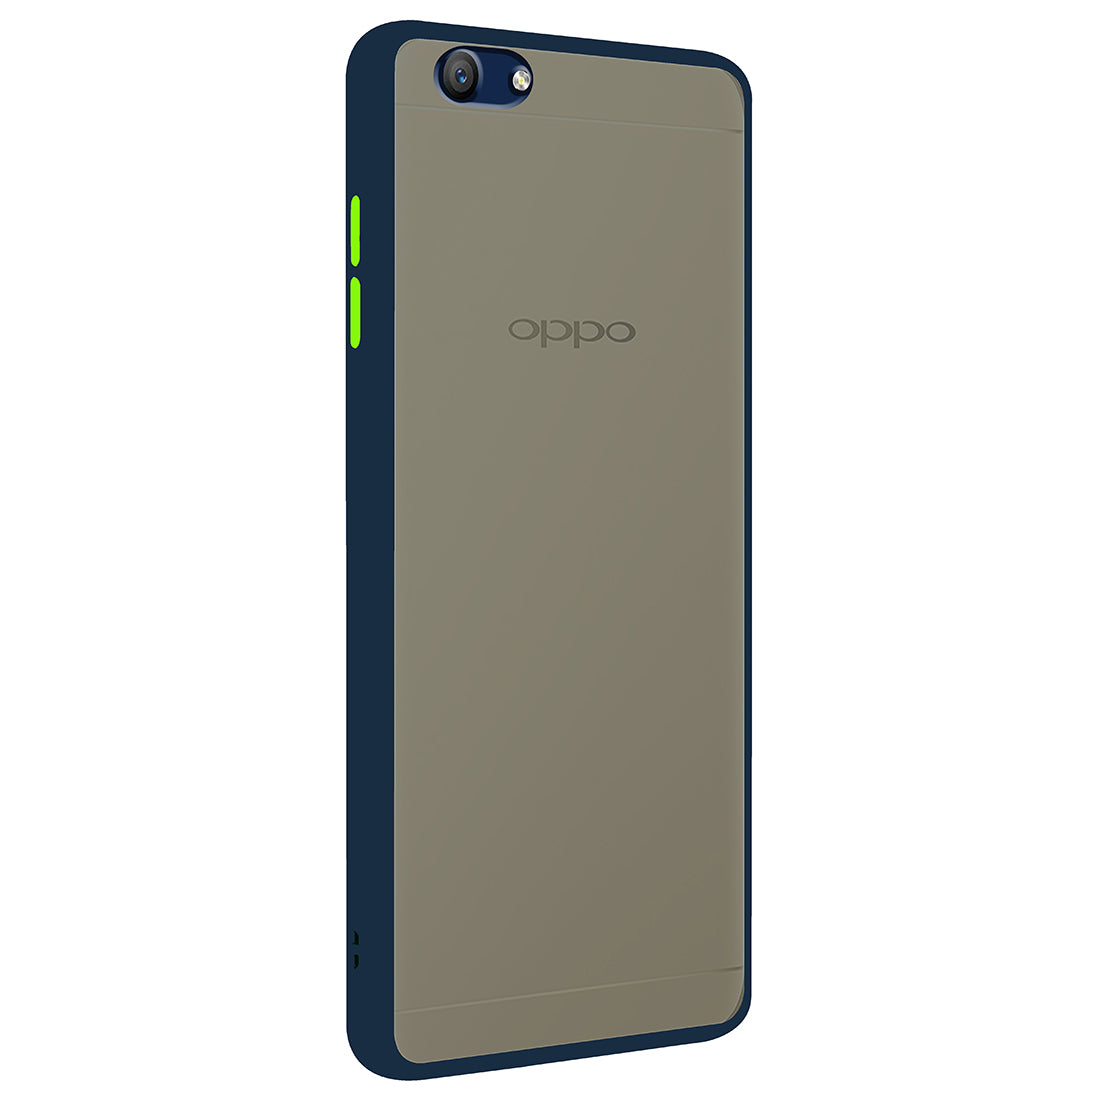 Smoke Back Case Cover for Oppo F1s